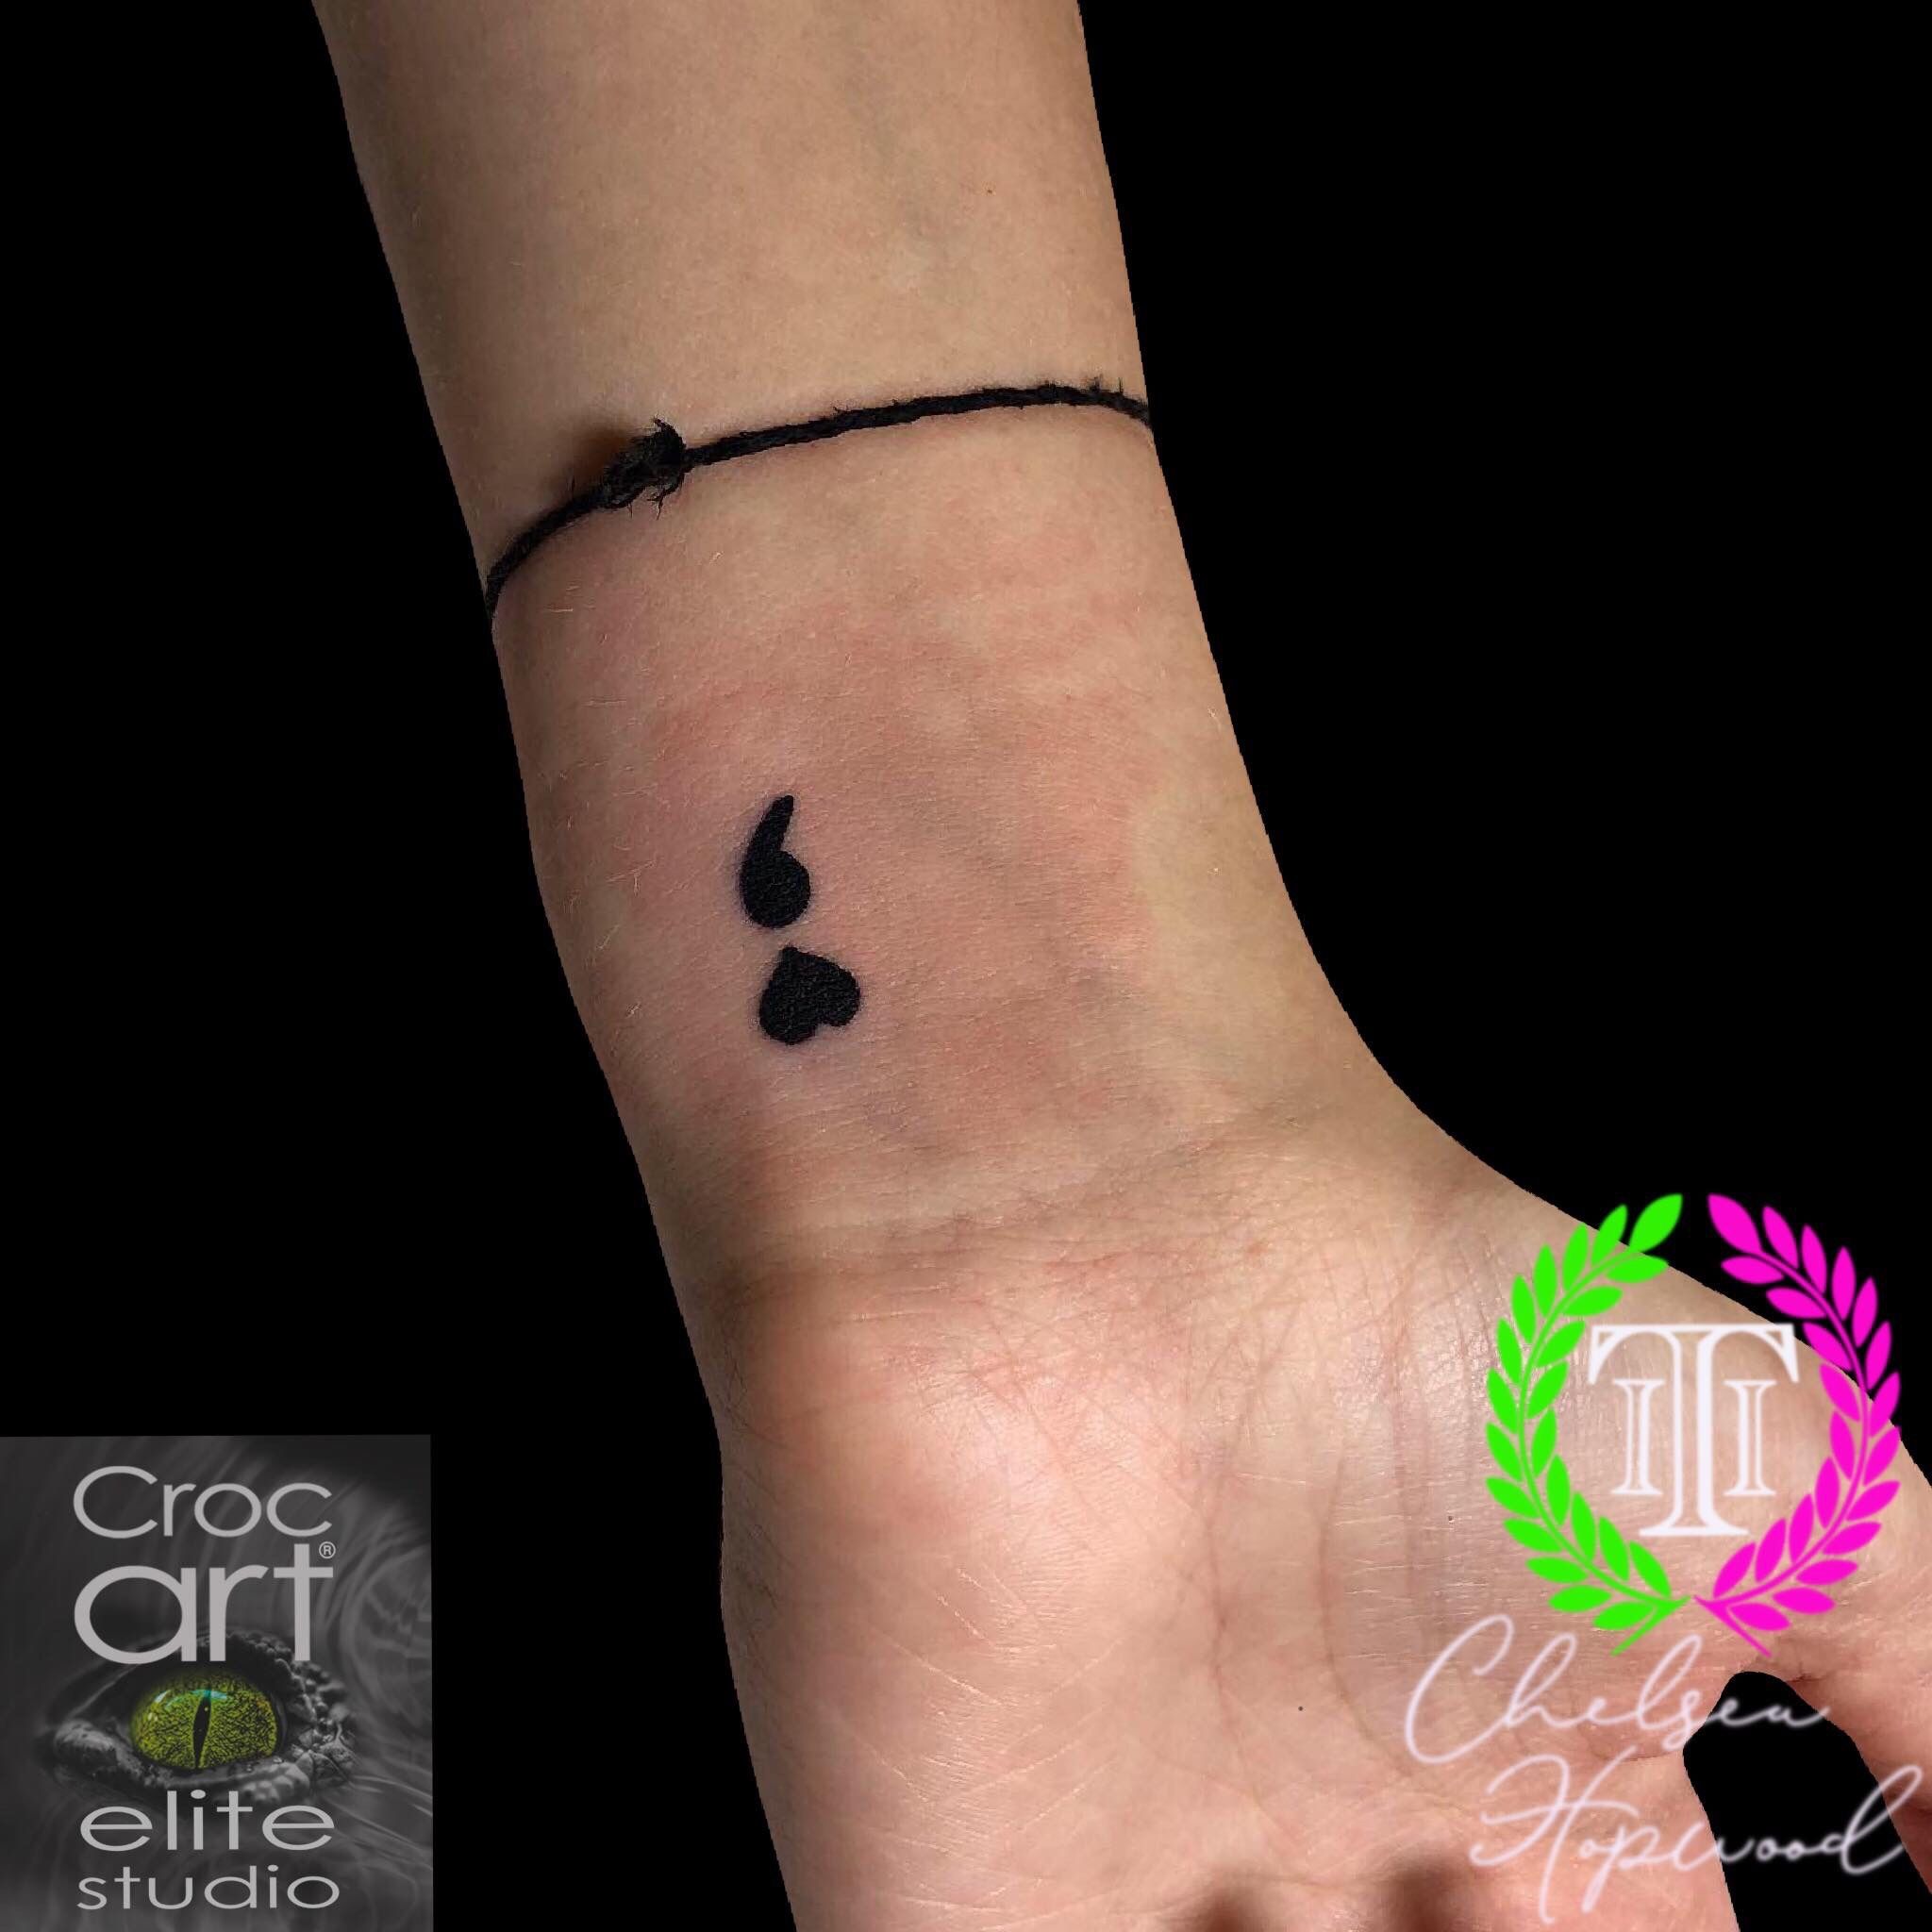 Selah Freedom on X In the life tattoos can be used by traffickers to  show ownership of their victimsbut a survivor graduate is changing that  Check out her empowering tattoo The 